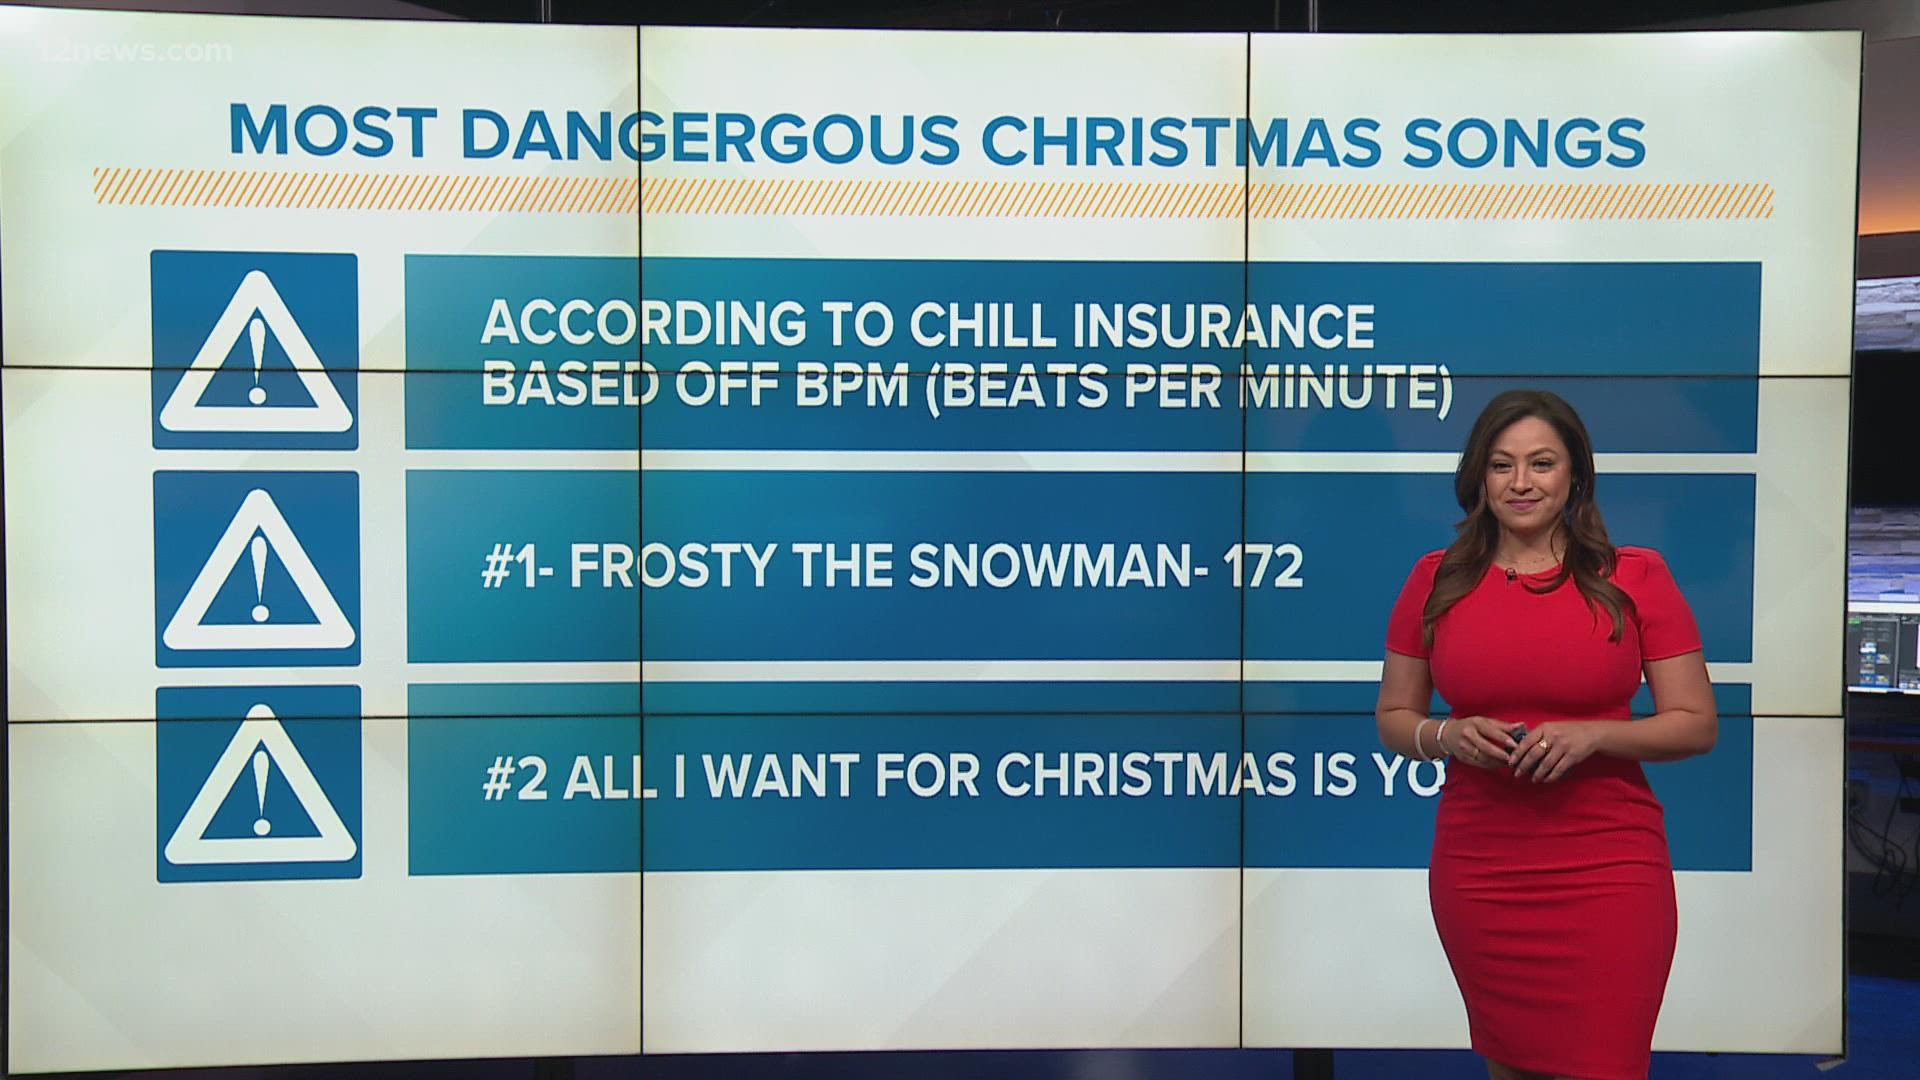 A recent ranking by Chill Insurance found Christmas songs with the most beats per minute are more associated with dangerous driving.